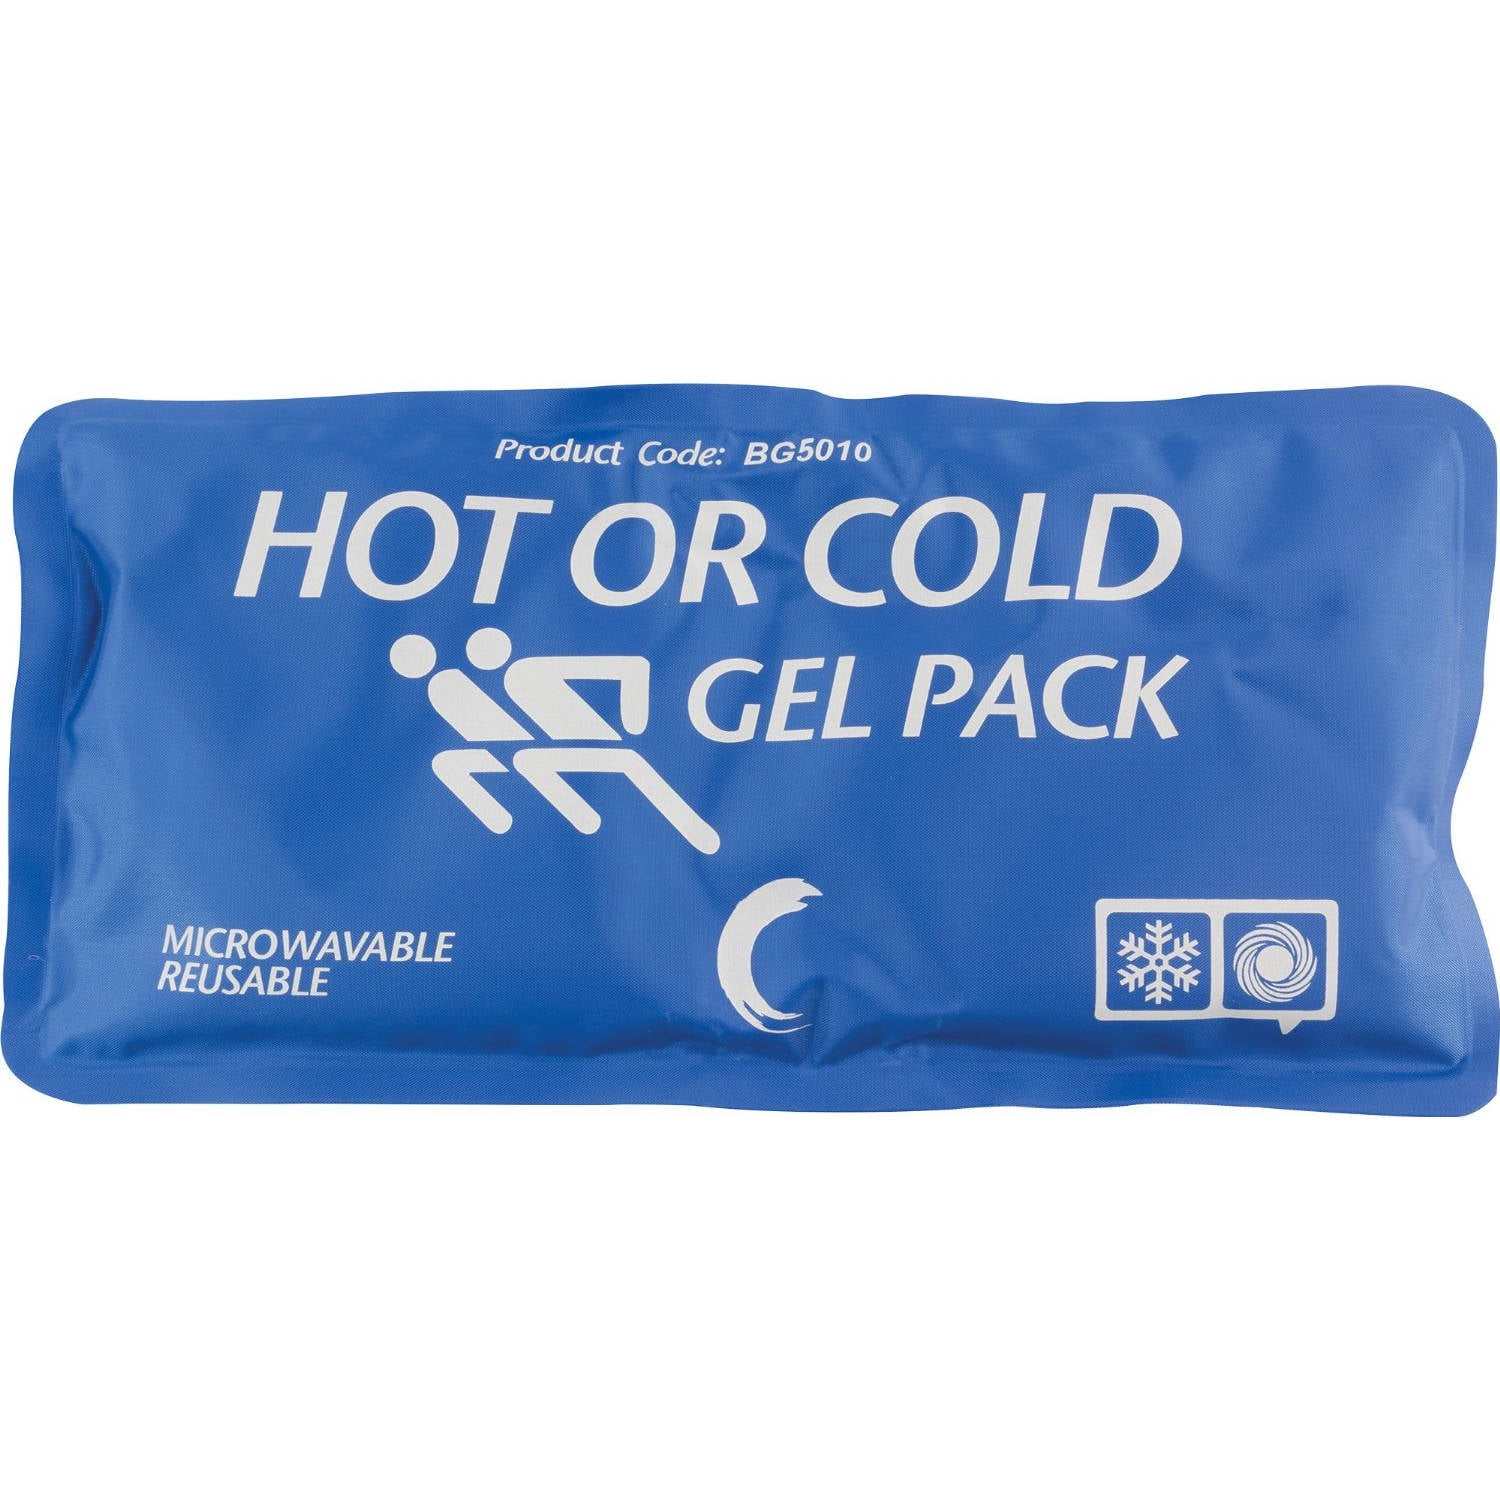 Roscoe Hot & Cold Reusable Gel Pack, 5 x 10